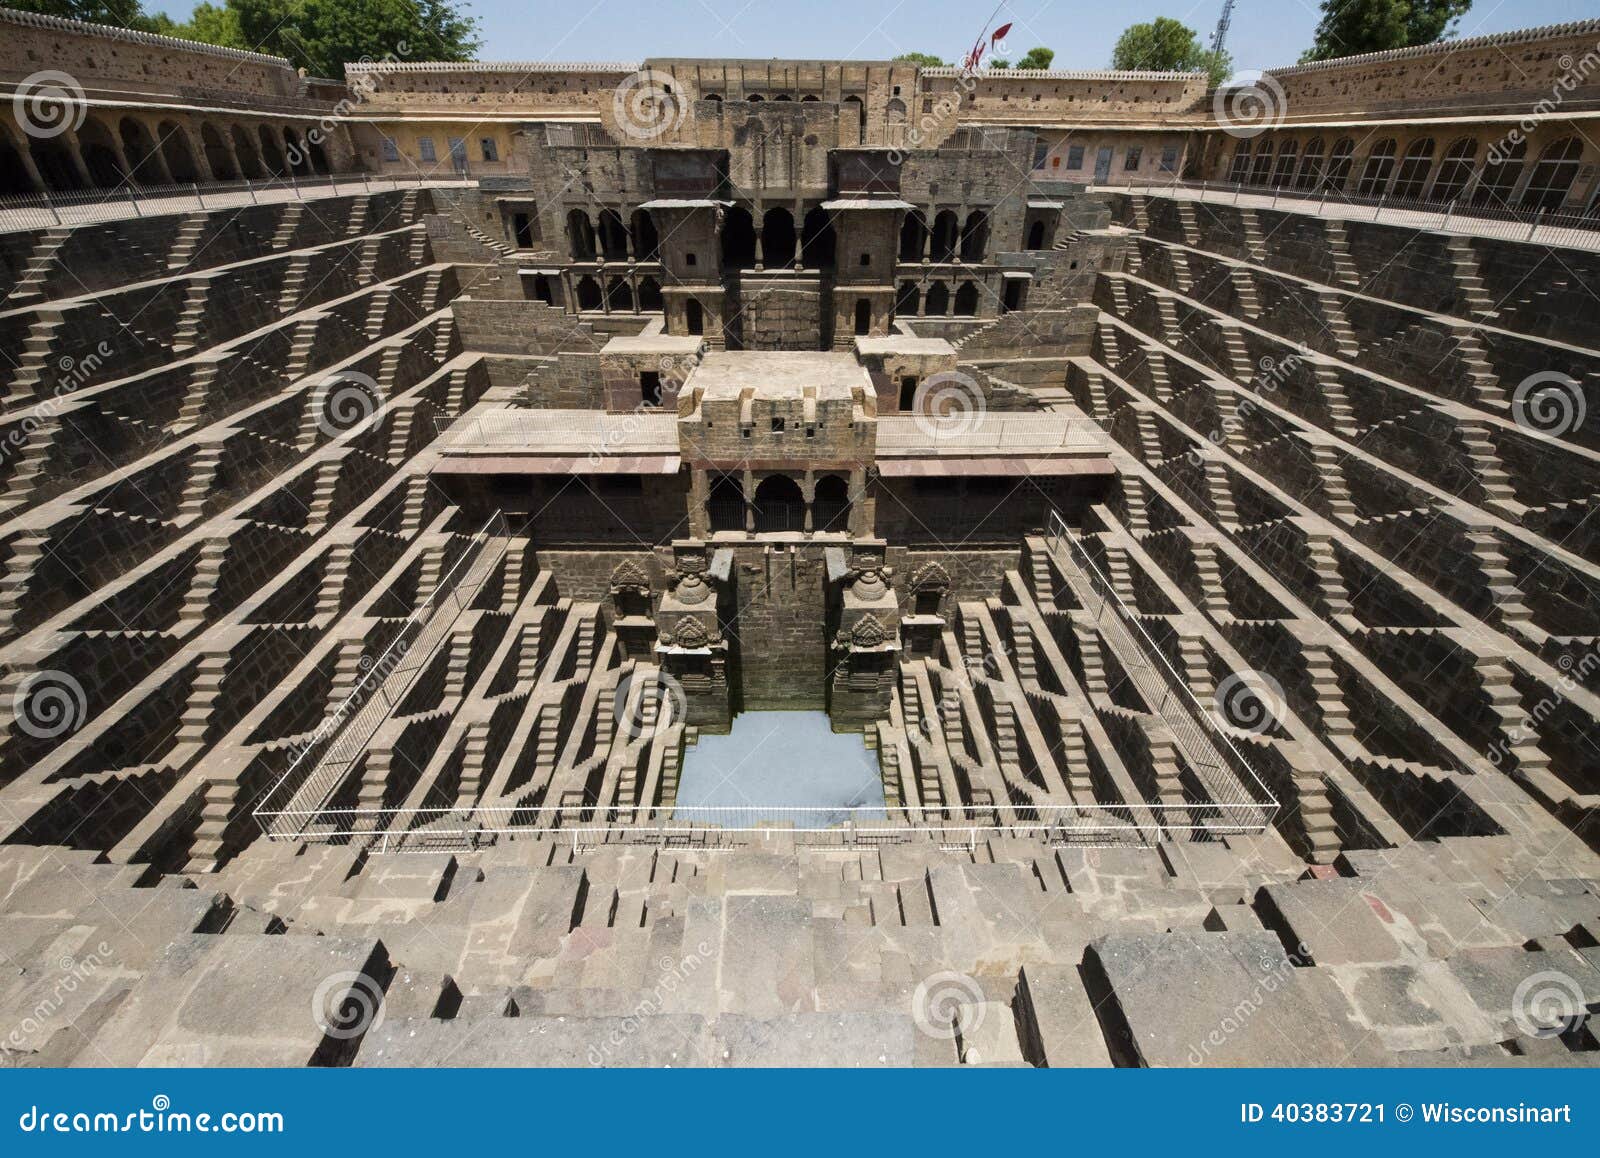 ancient step well, tourist travel attraction in india